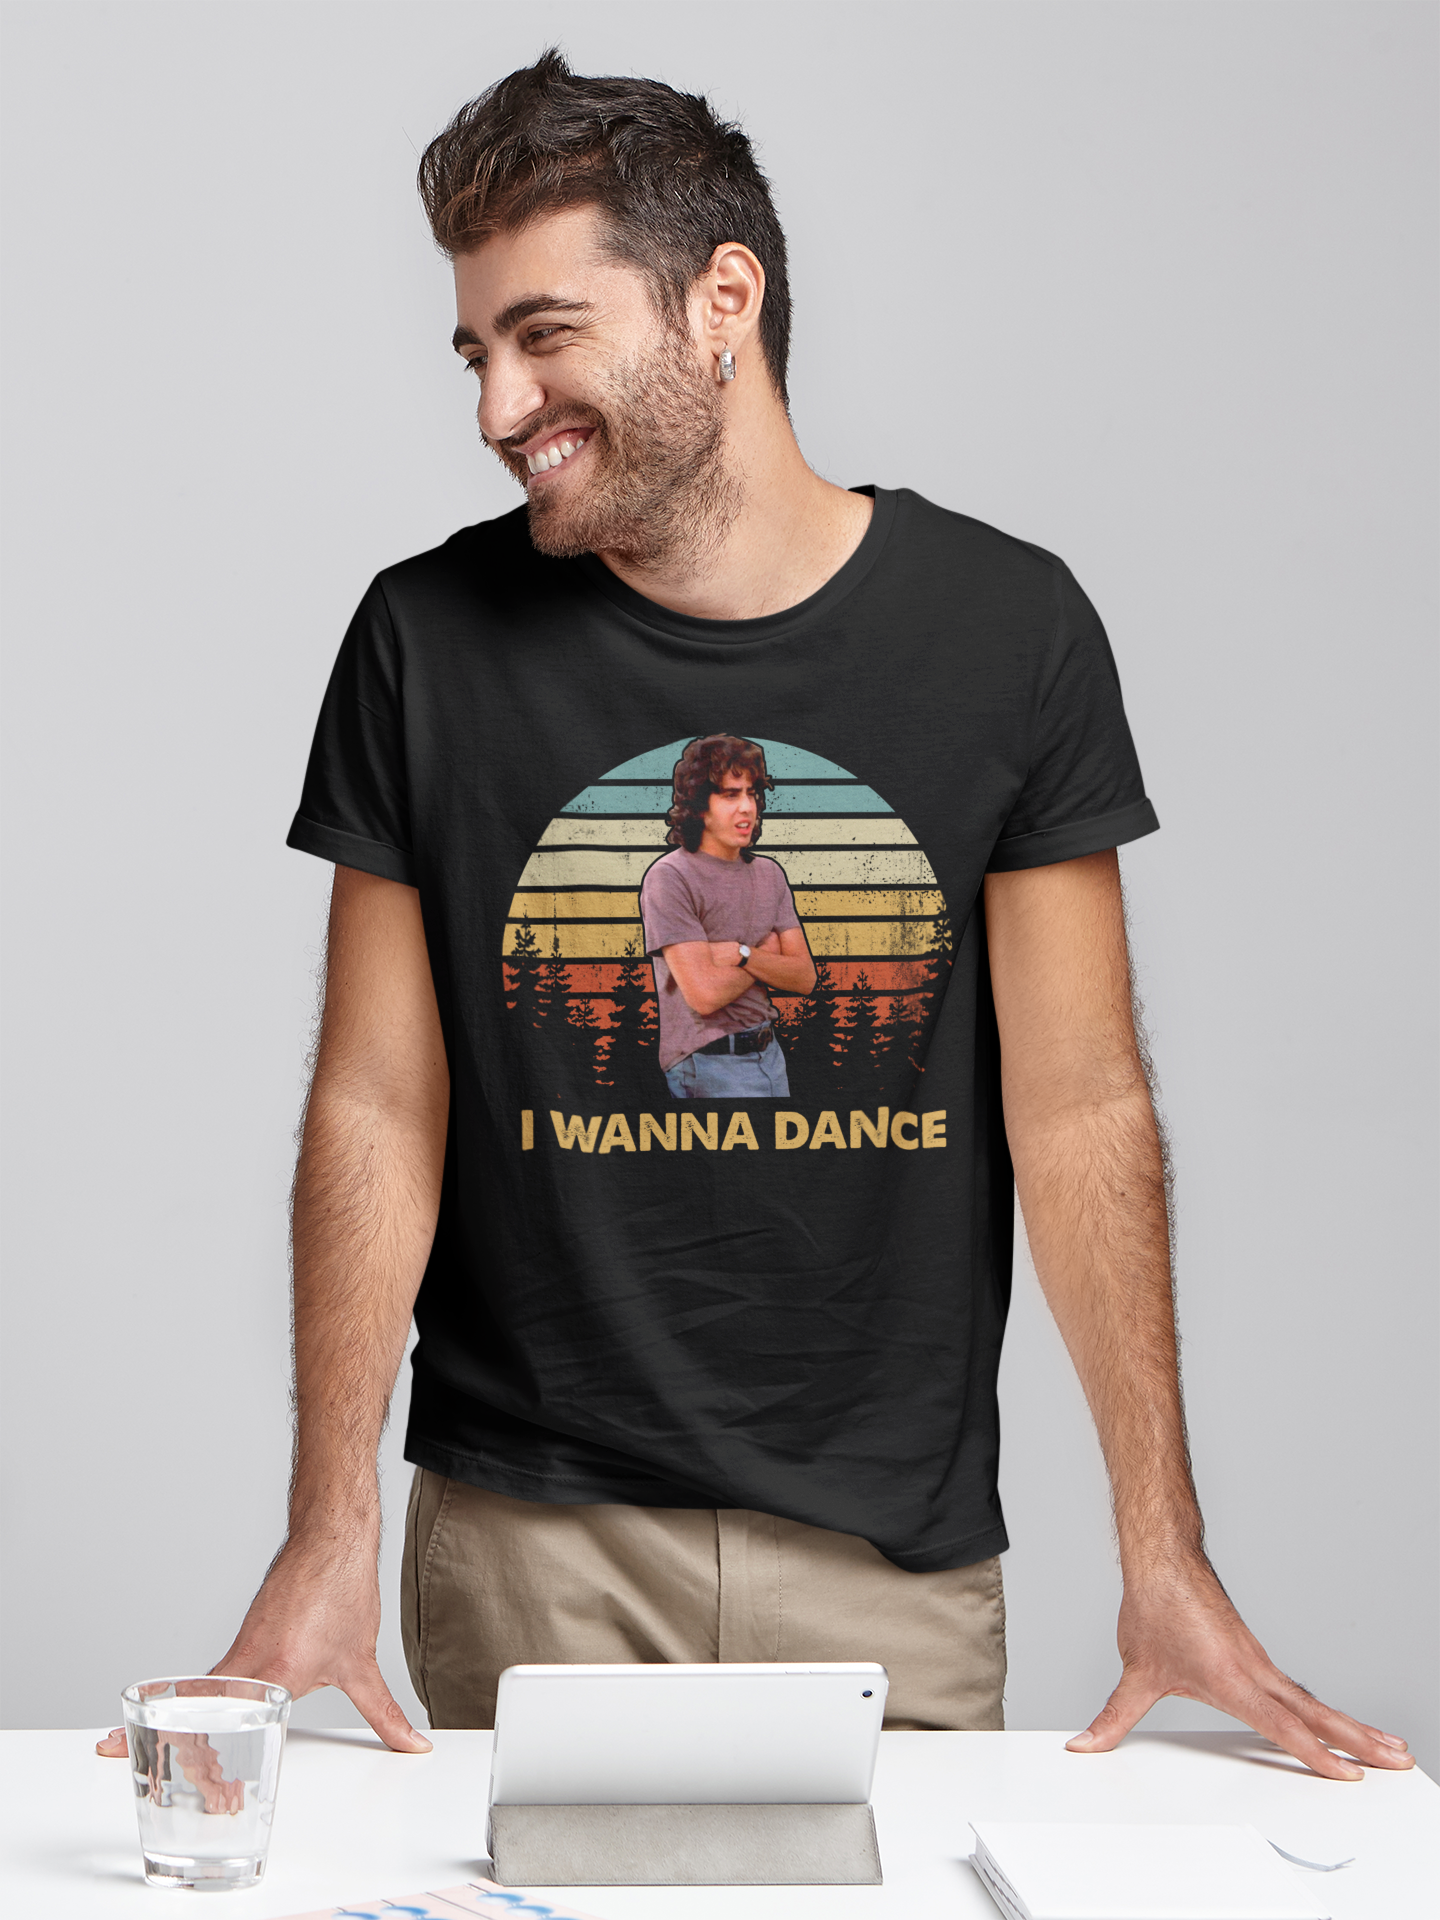 Dazed And Confused Vintage T Shirt, Mike Newhouse T Shirt, I Wanna Dance Tshirt